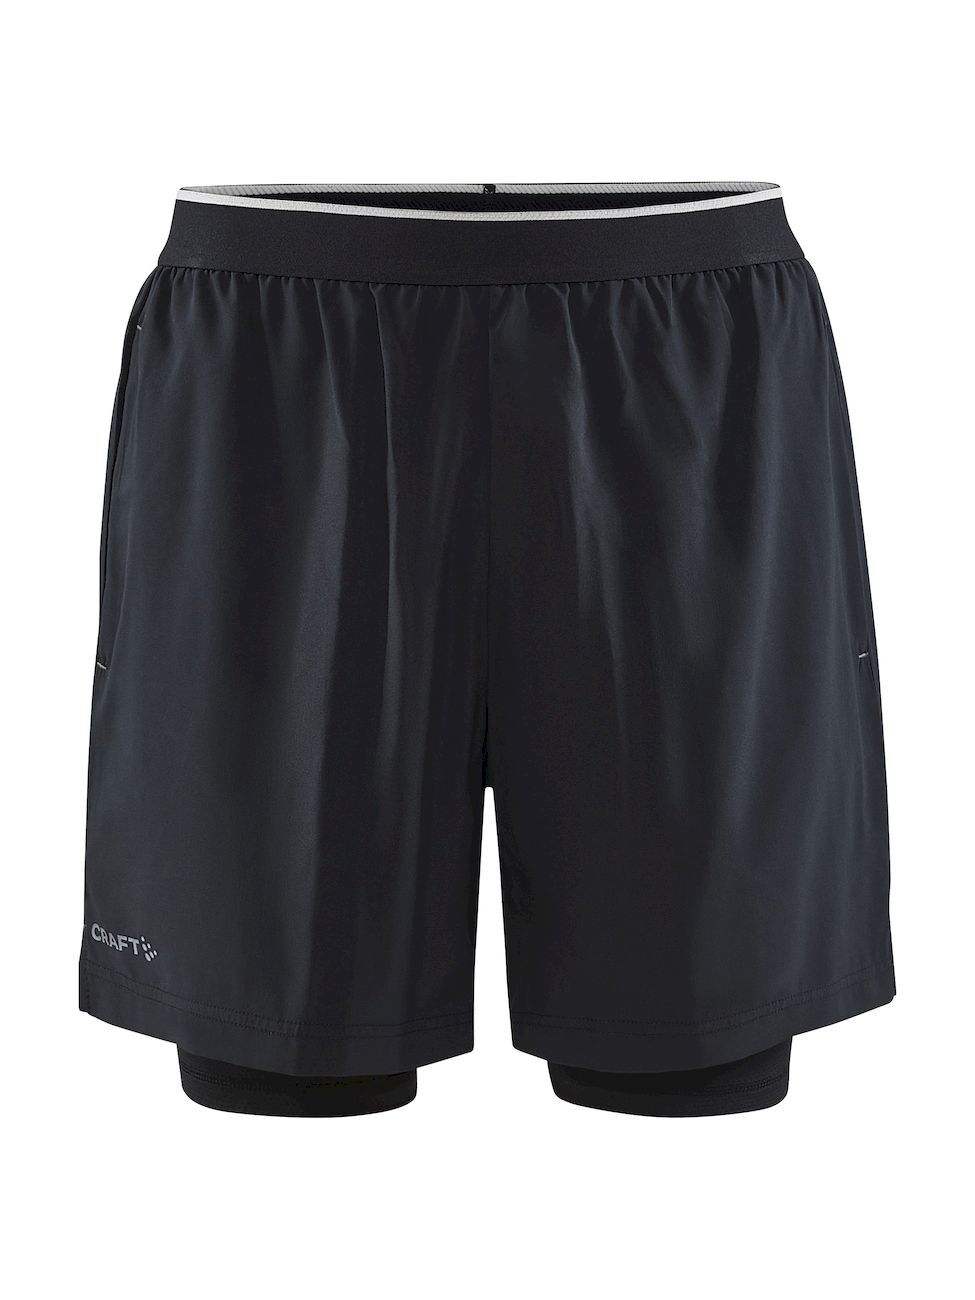 Craft ADV Charge 2-In-1 Stretch Short - Pantalones cortos de running - Hombre